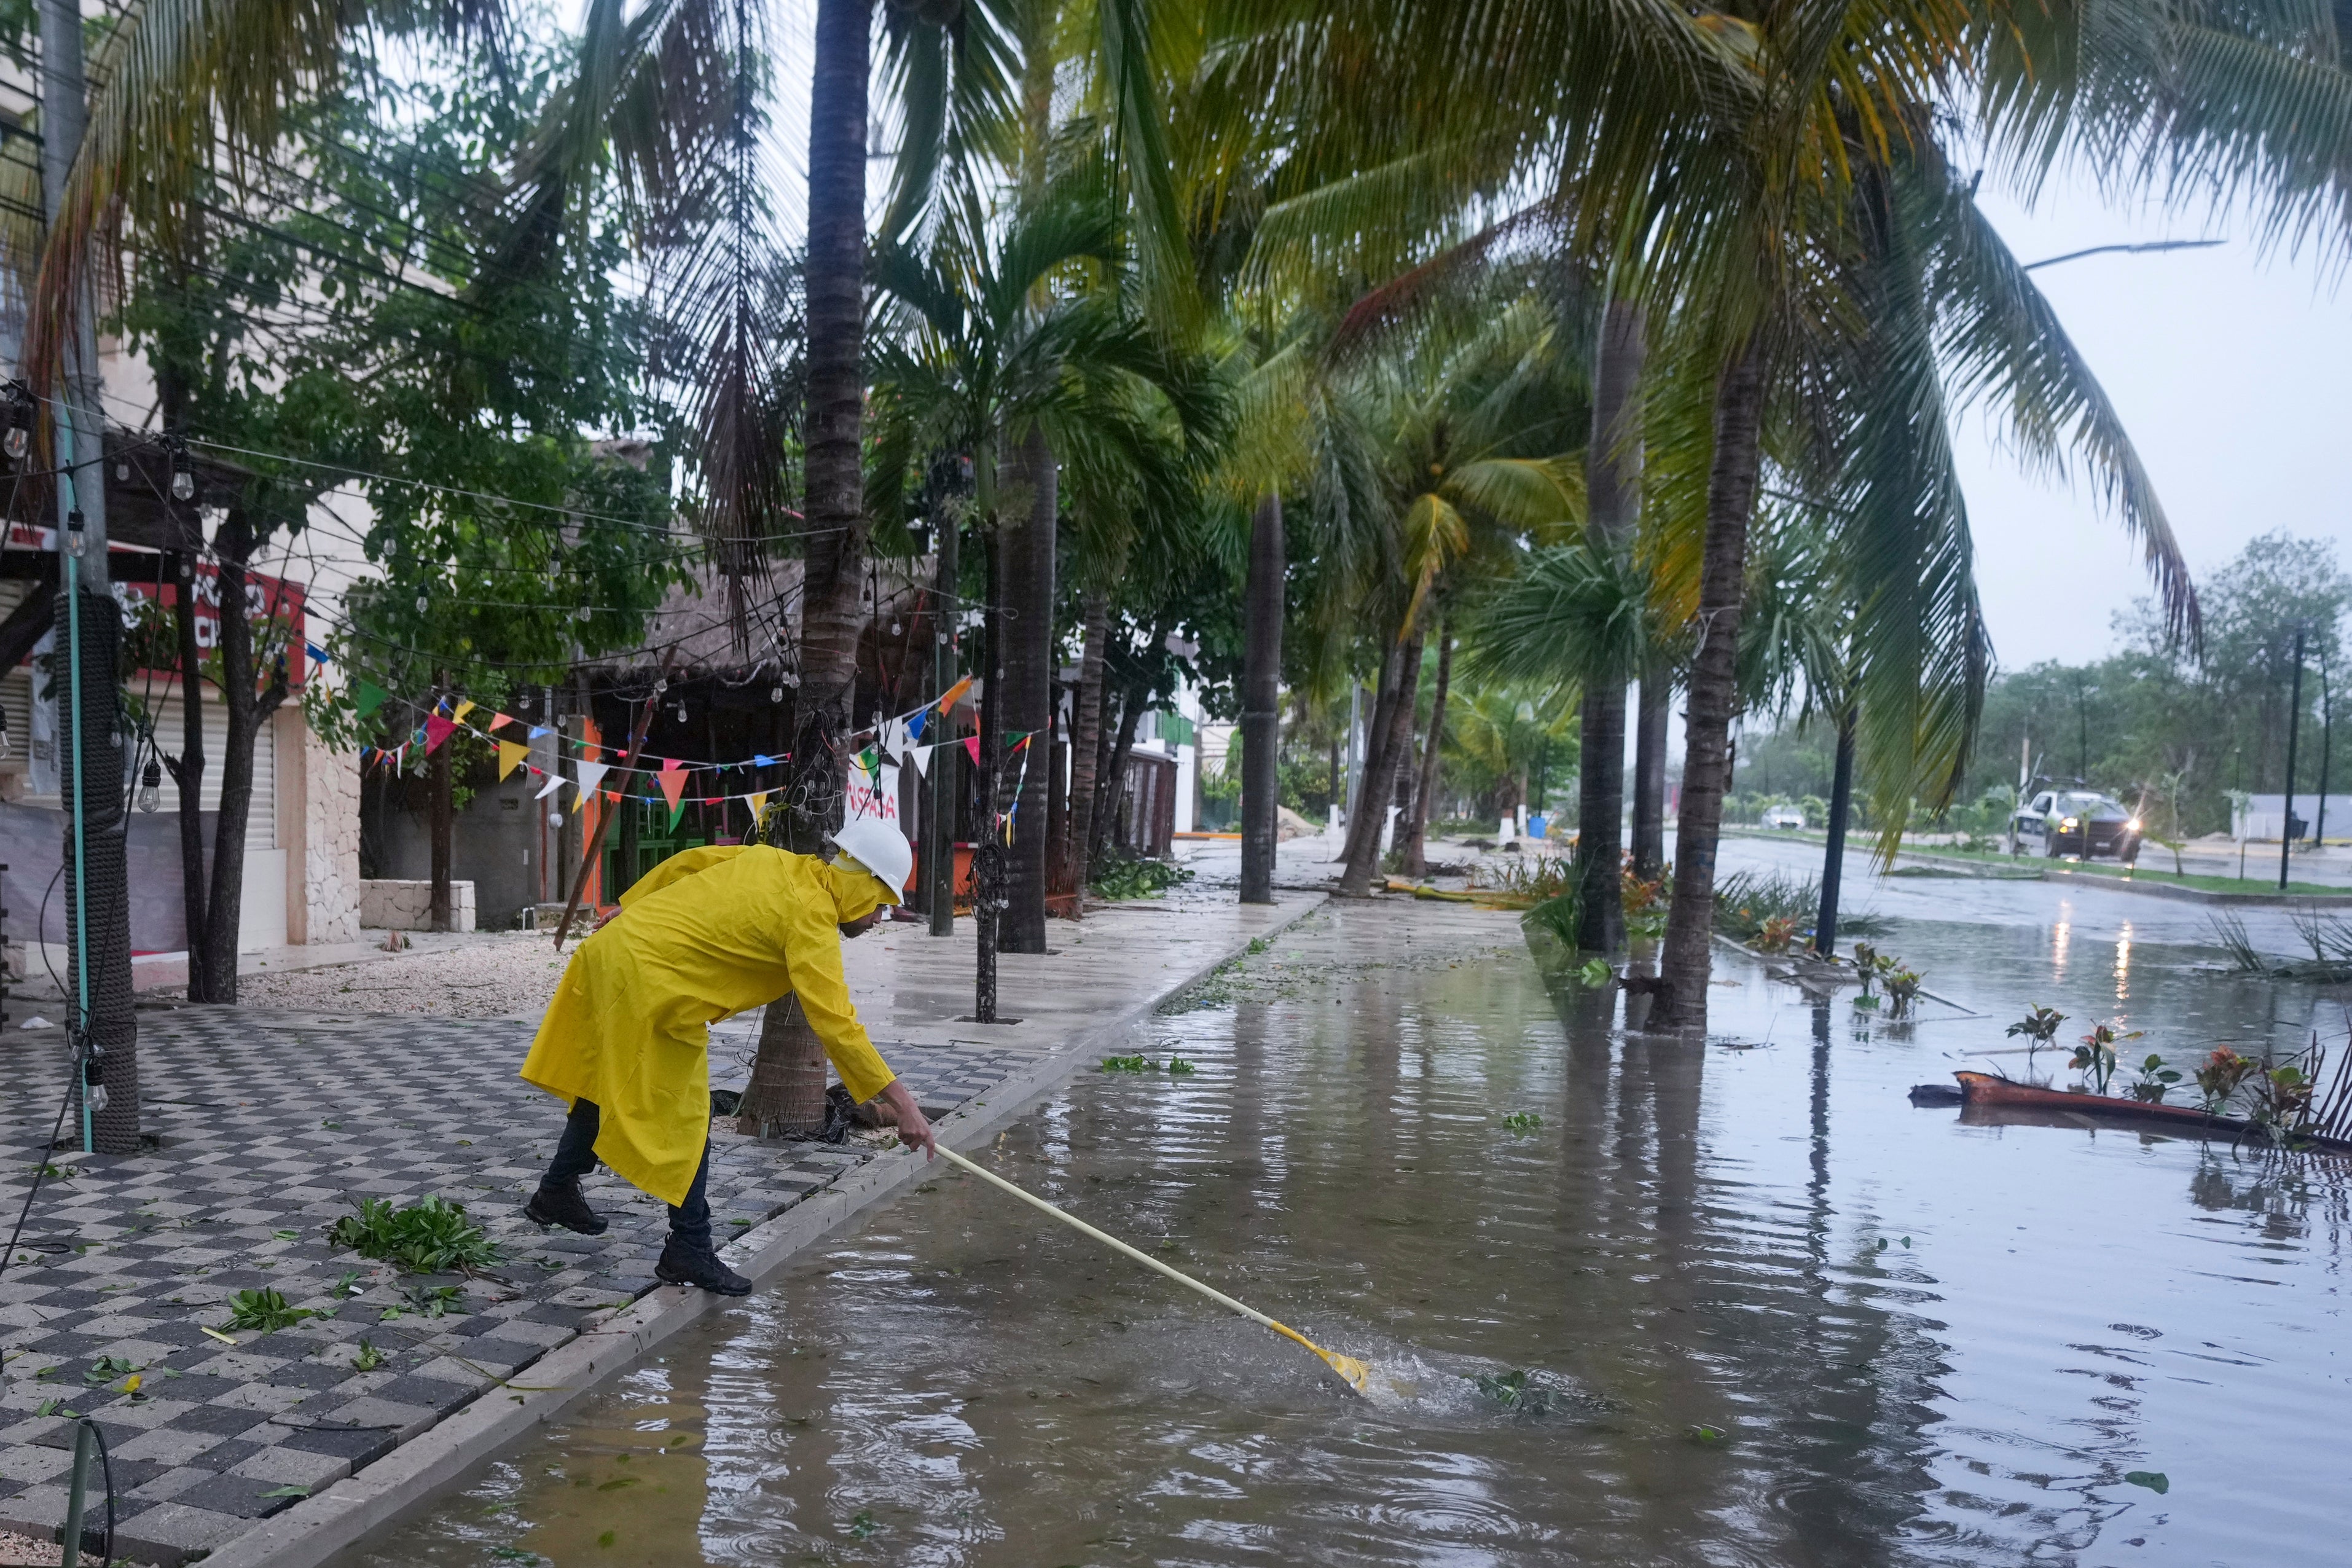 A man unclogs a drain in a flooded street after Beryl, now a tropical storm, hit Tulum Mexico on Friday